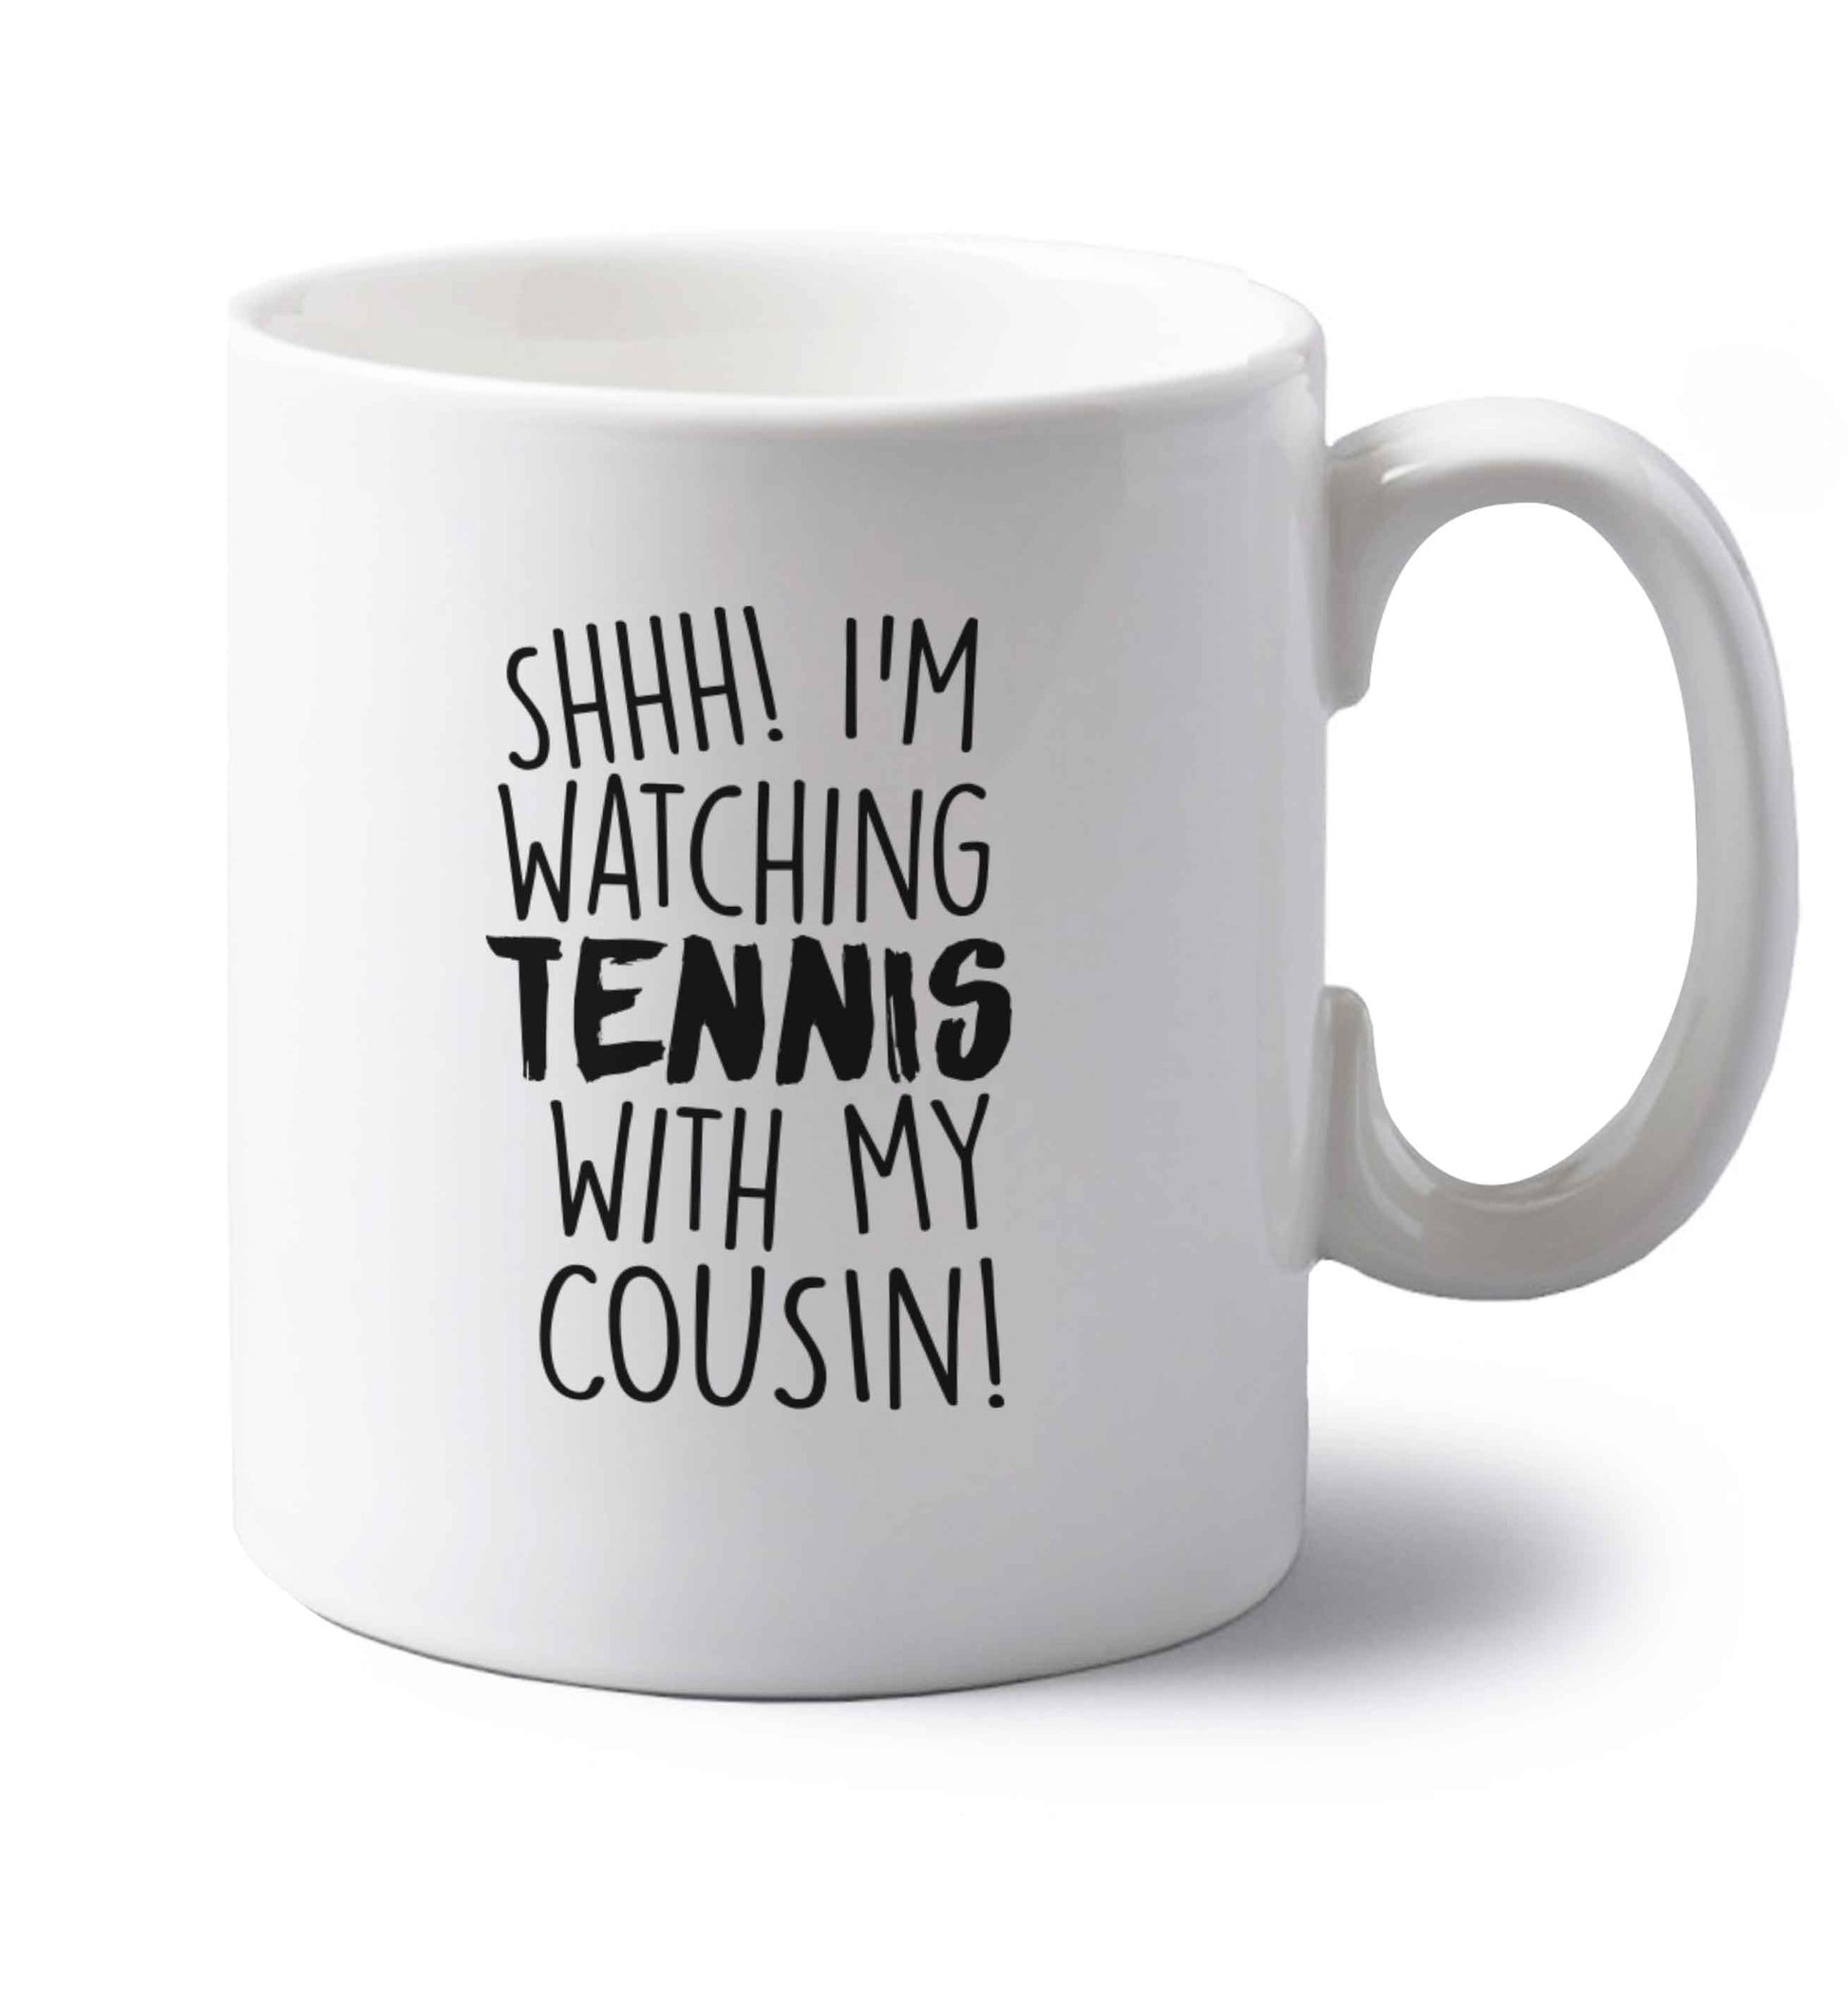 Shh! I'm watching tennis with my cousin! left handed white ceramic mug 